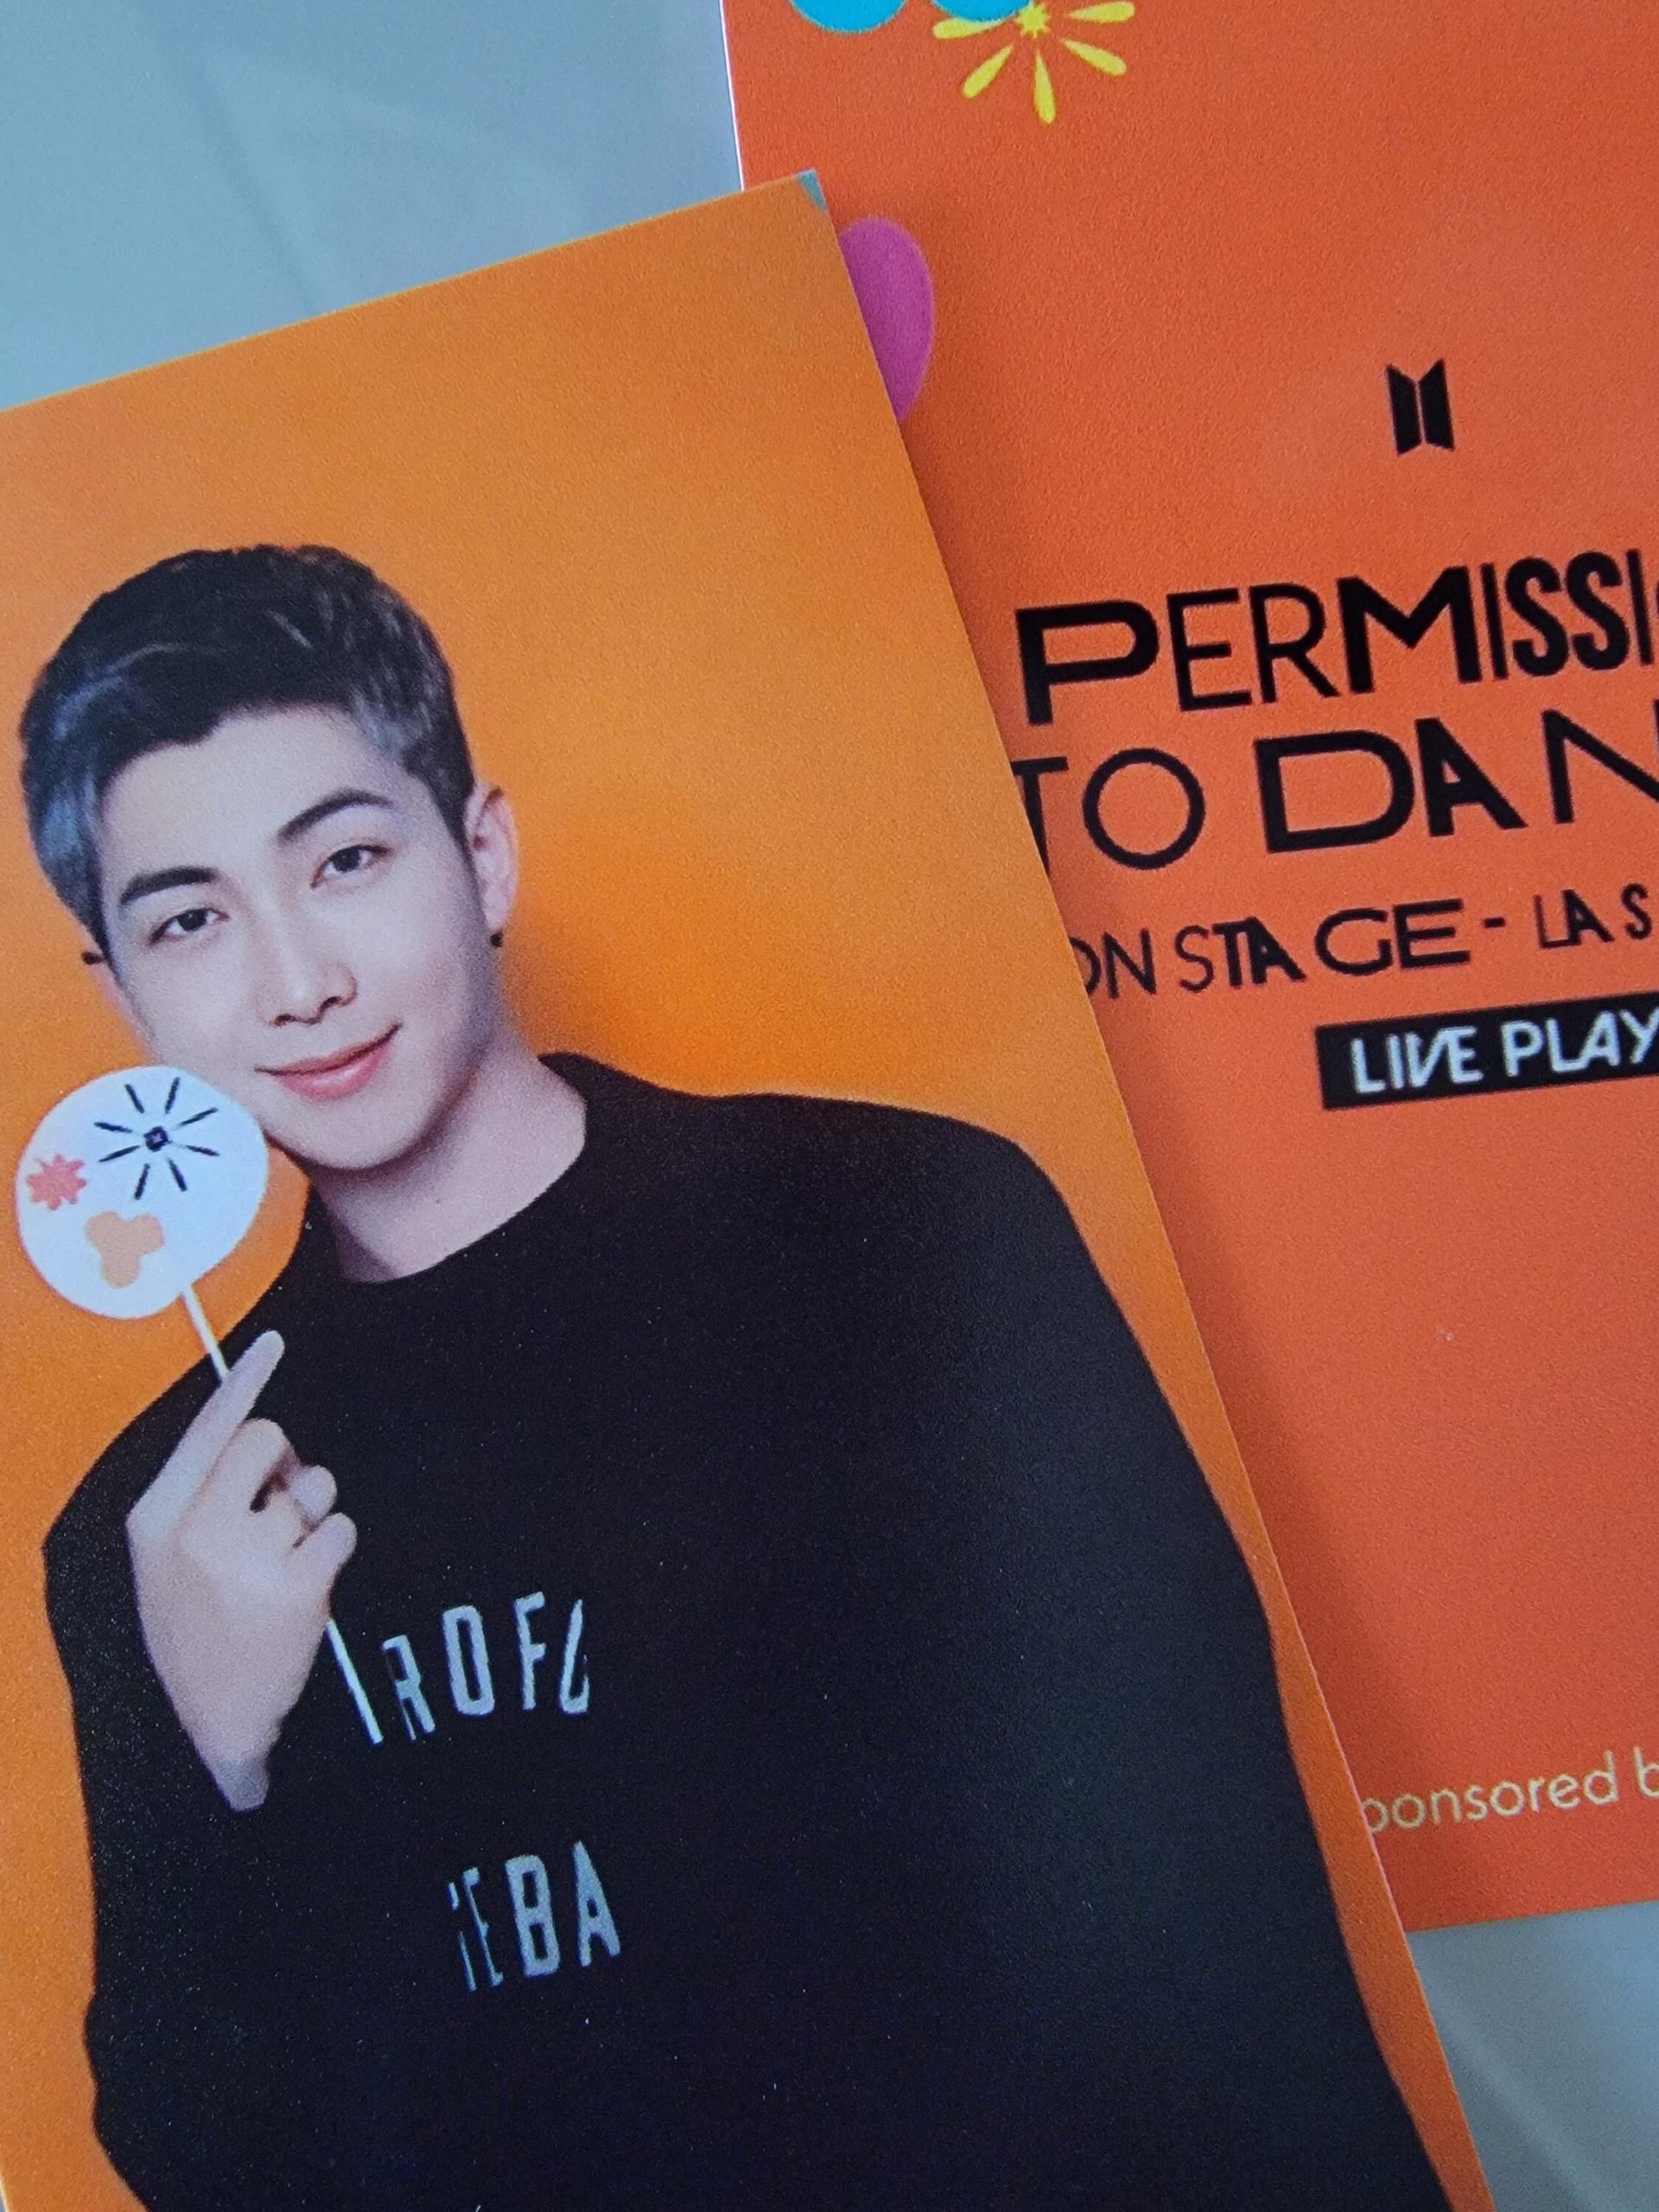 BTS Permission to Dance Live Play Photo Cards